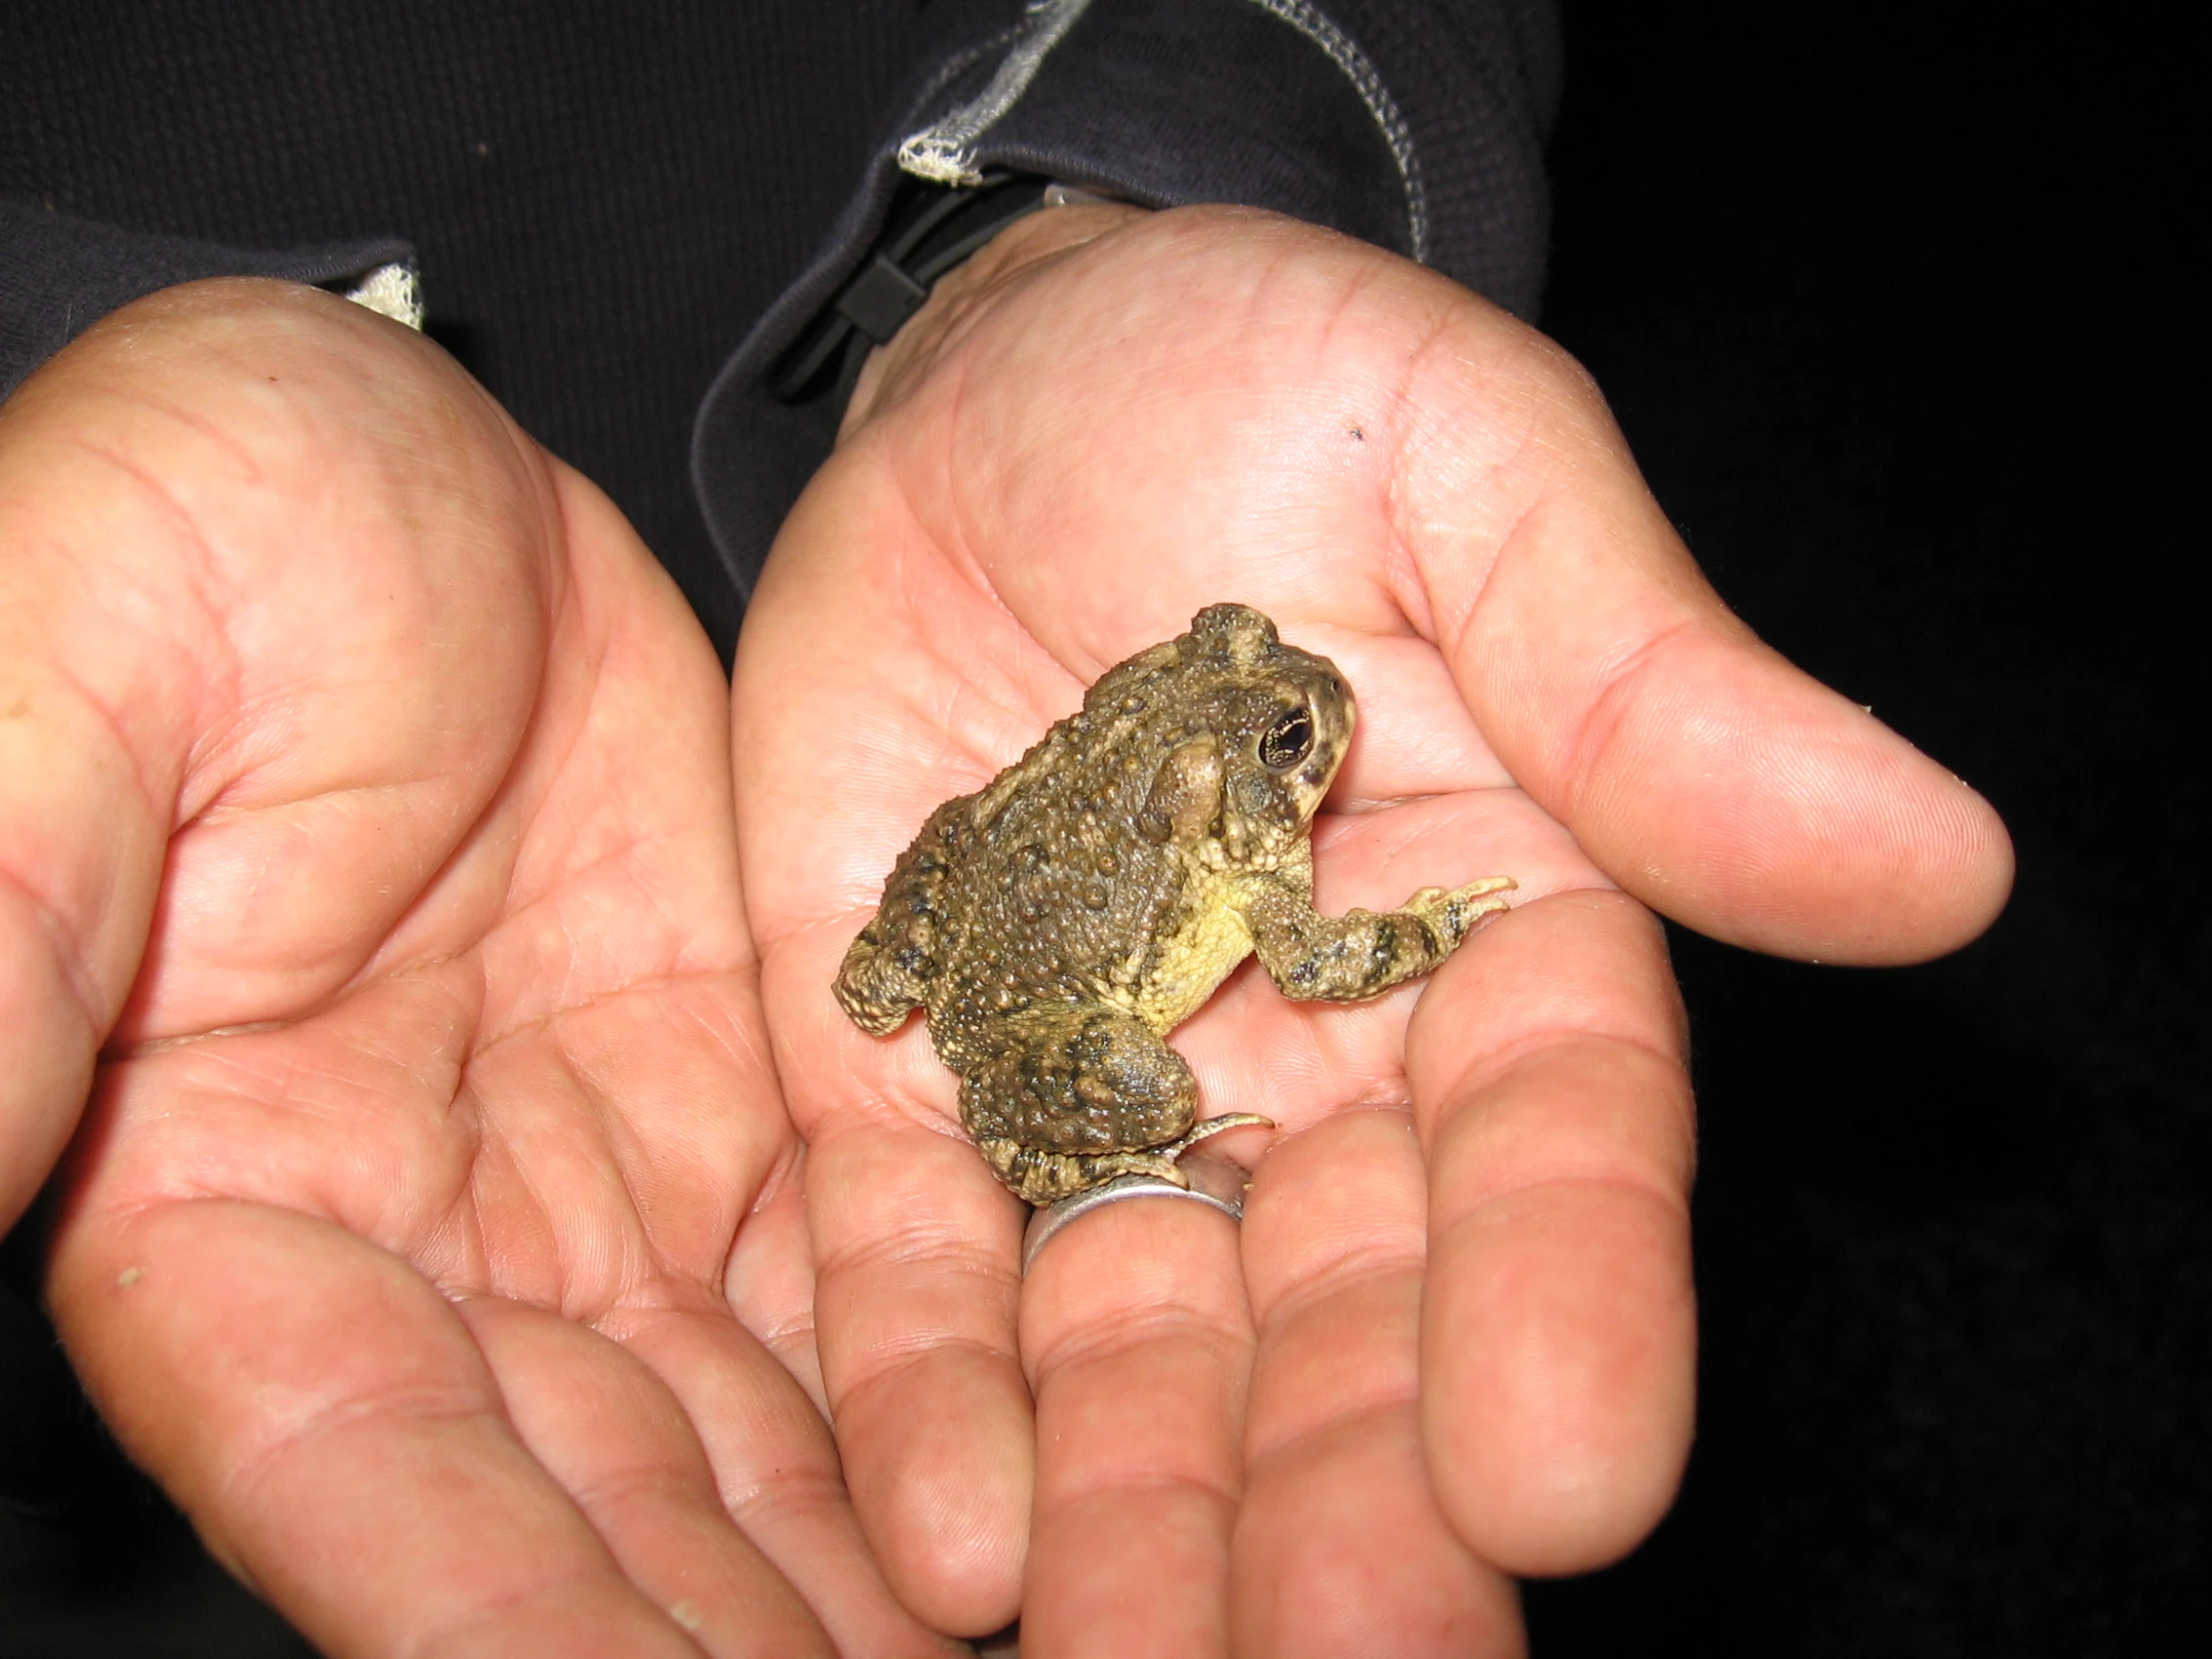 a small brown and white frog being held in two hands